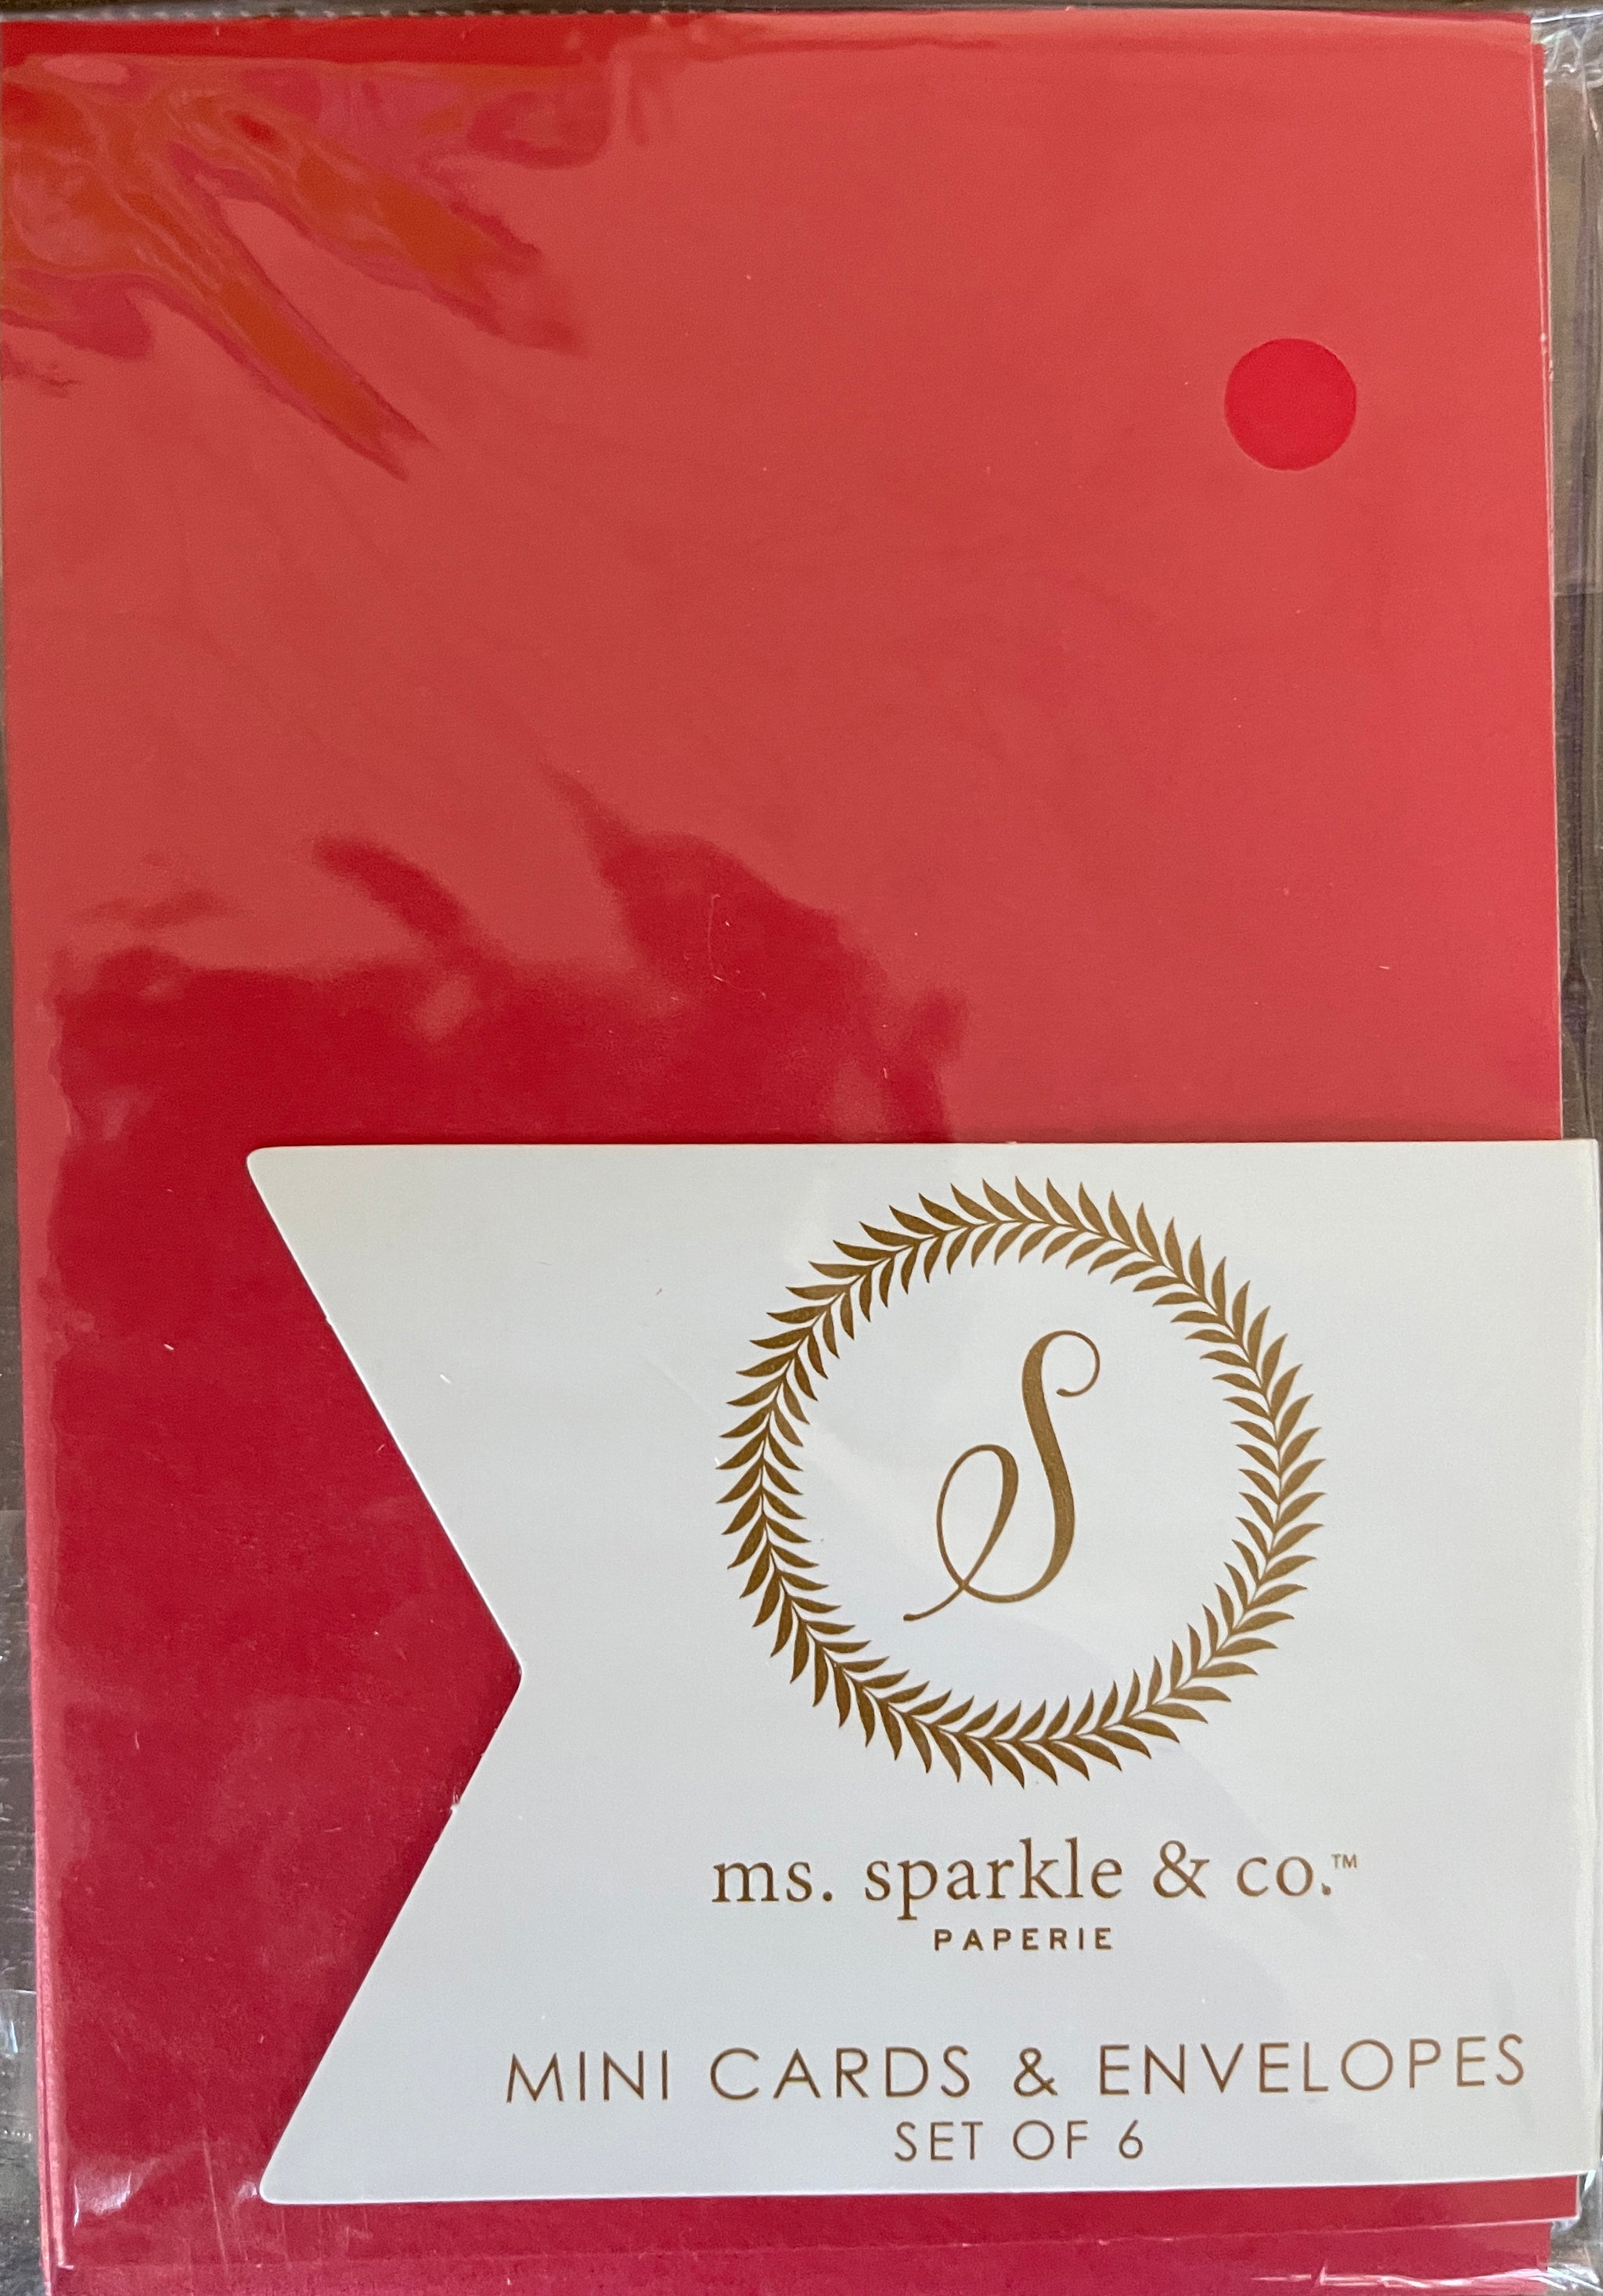 American Crafts Ms. Sparkles & Co. Paperie Cards and Tags Set - Stationery, Arts and Crafts Material - Fuchsia